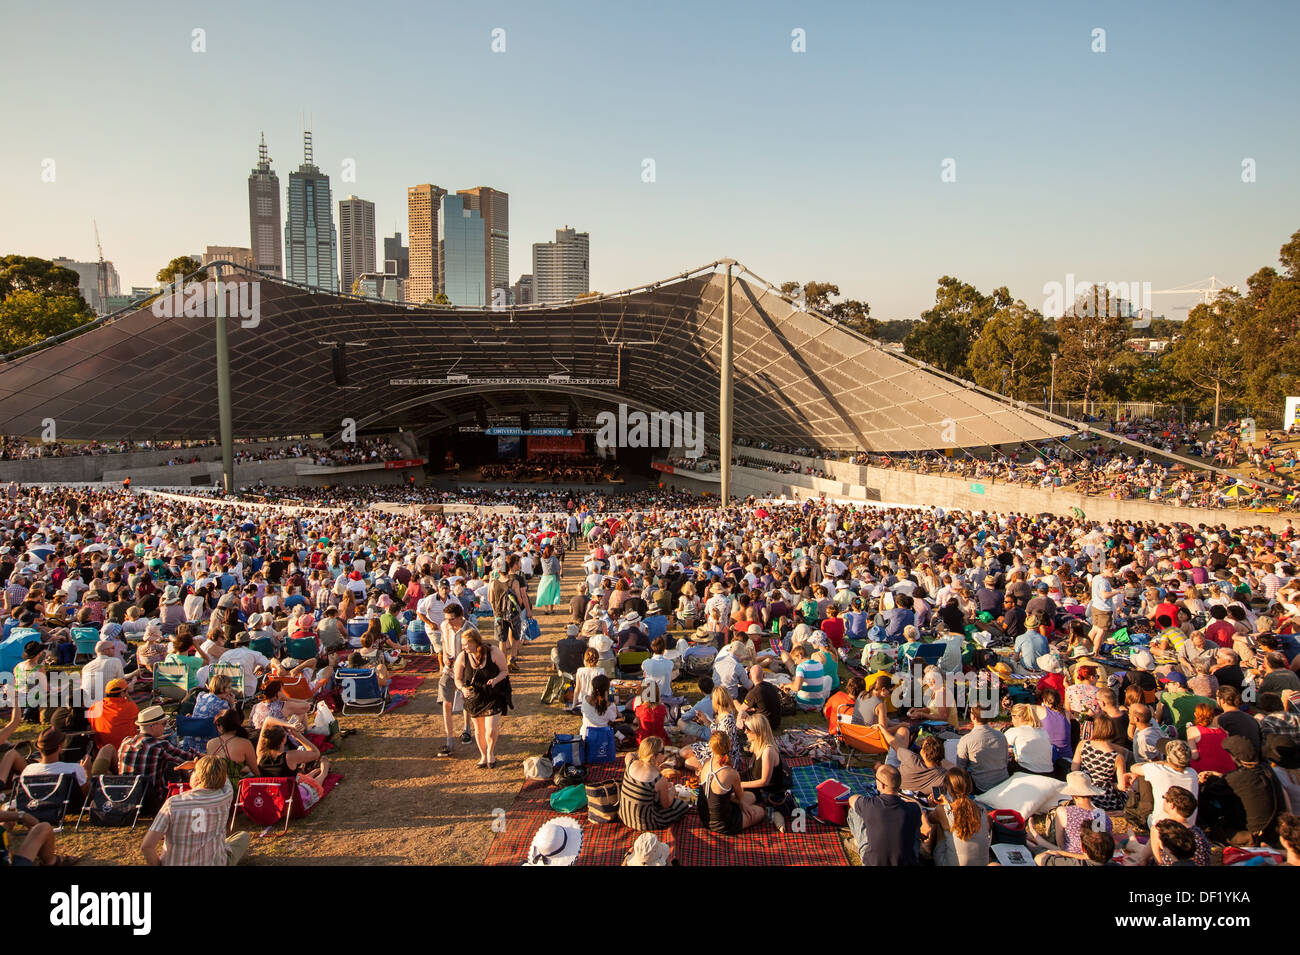 Melbourne Australia white nights / night festival in the city center, myer music bowl people in crowd. and city skyline. Stock Photo